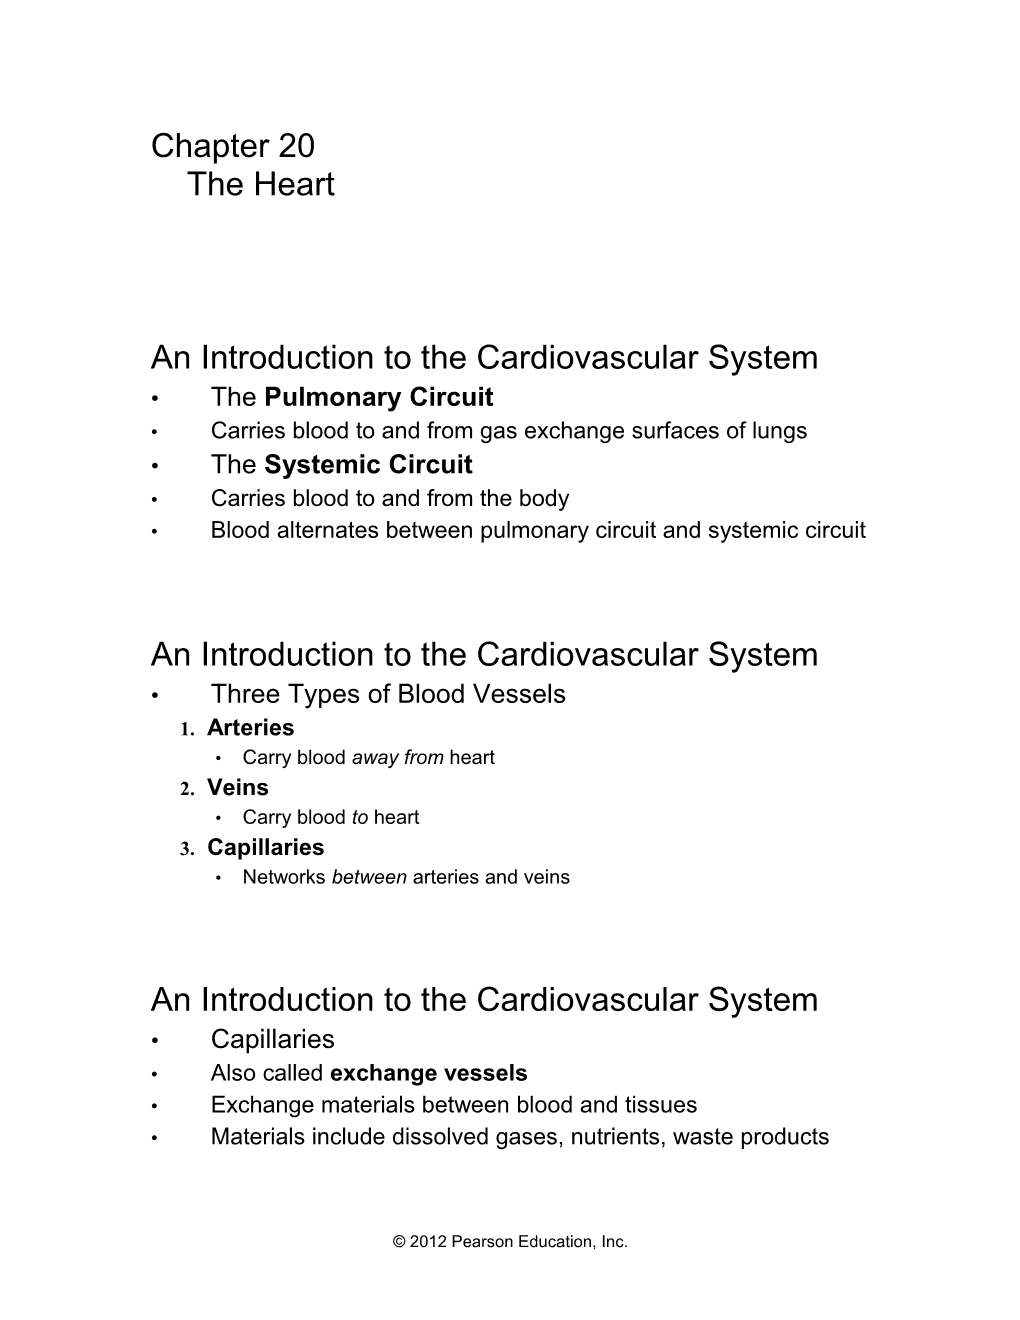 An Introduction to the Cardiovascular System